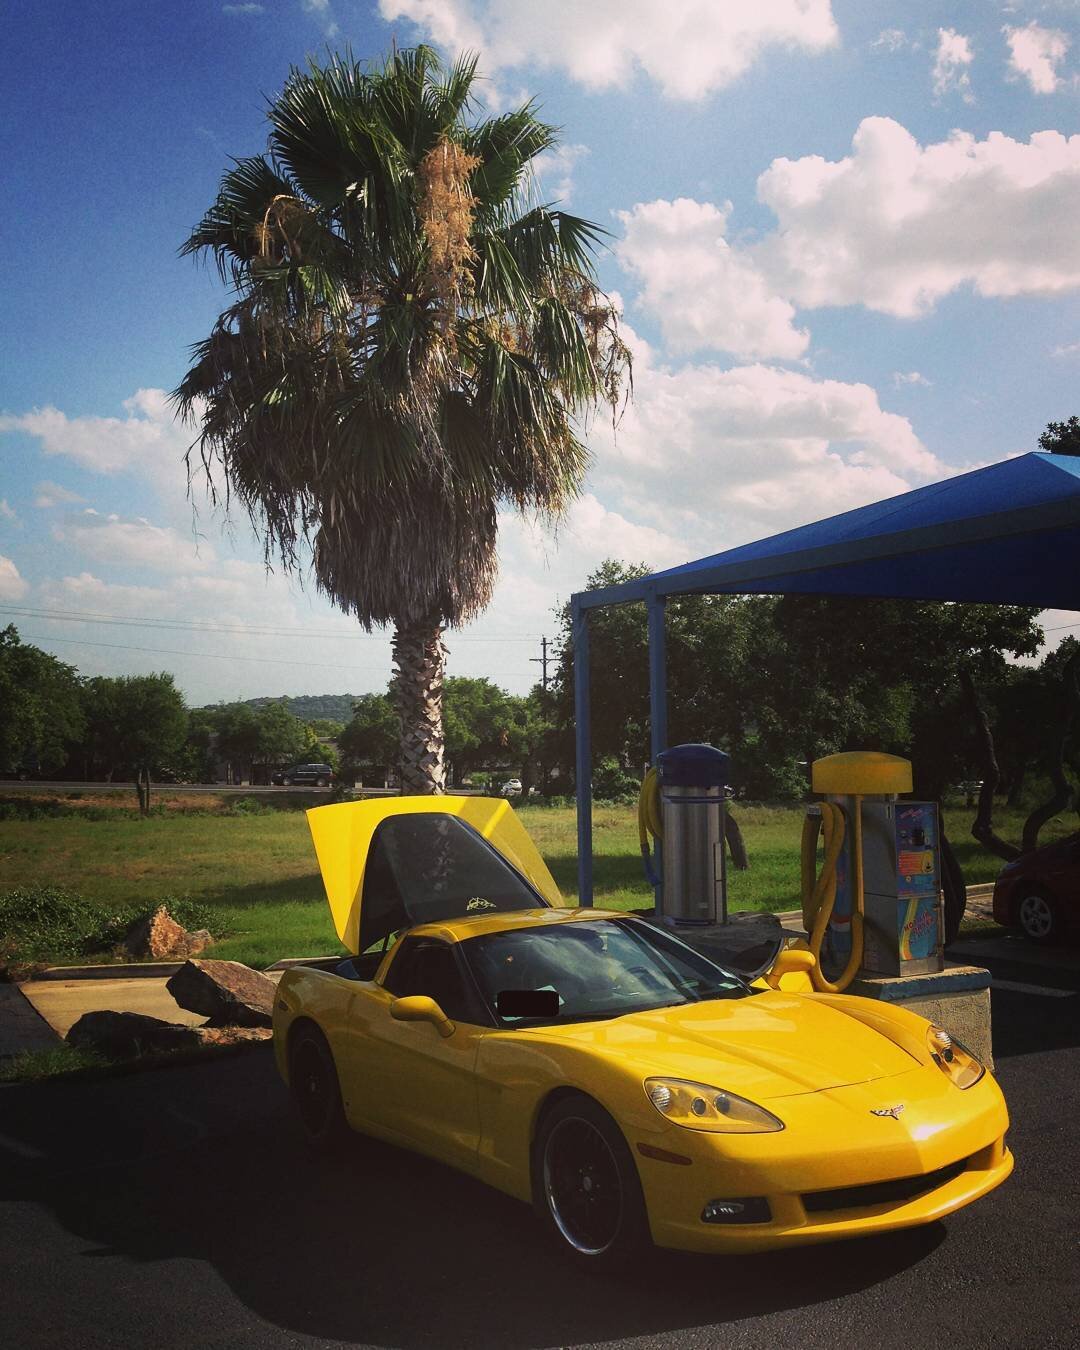 What a Beautiful Way to Spend a Saturday... #bulverdecarwash #beautiful #saturday #july4thweekend  #corvette  #clean  #sparkling #gorgeous #carwash #cleancar